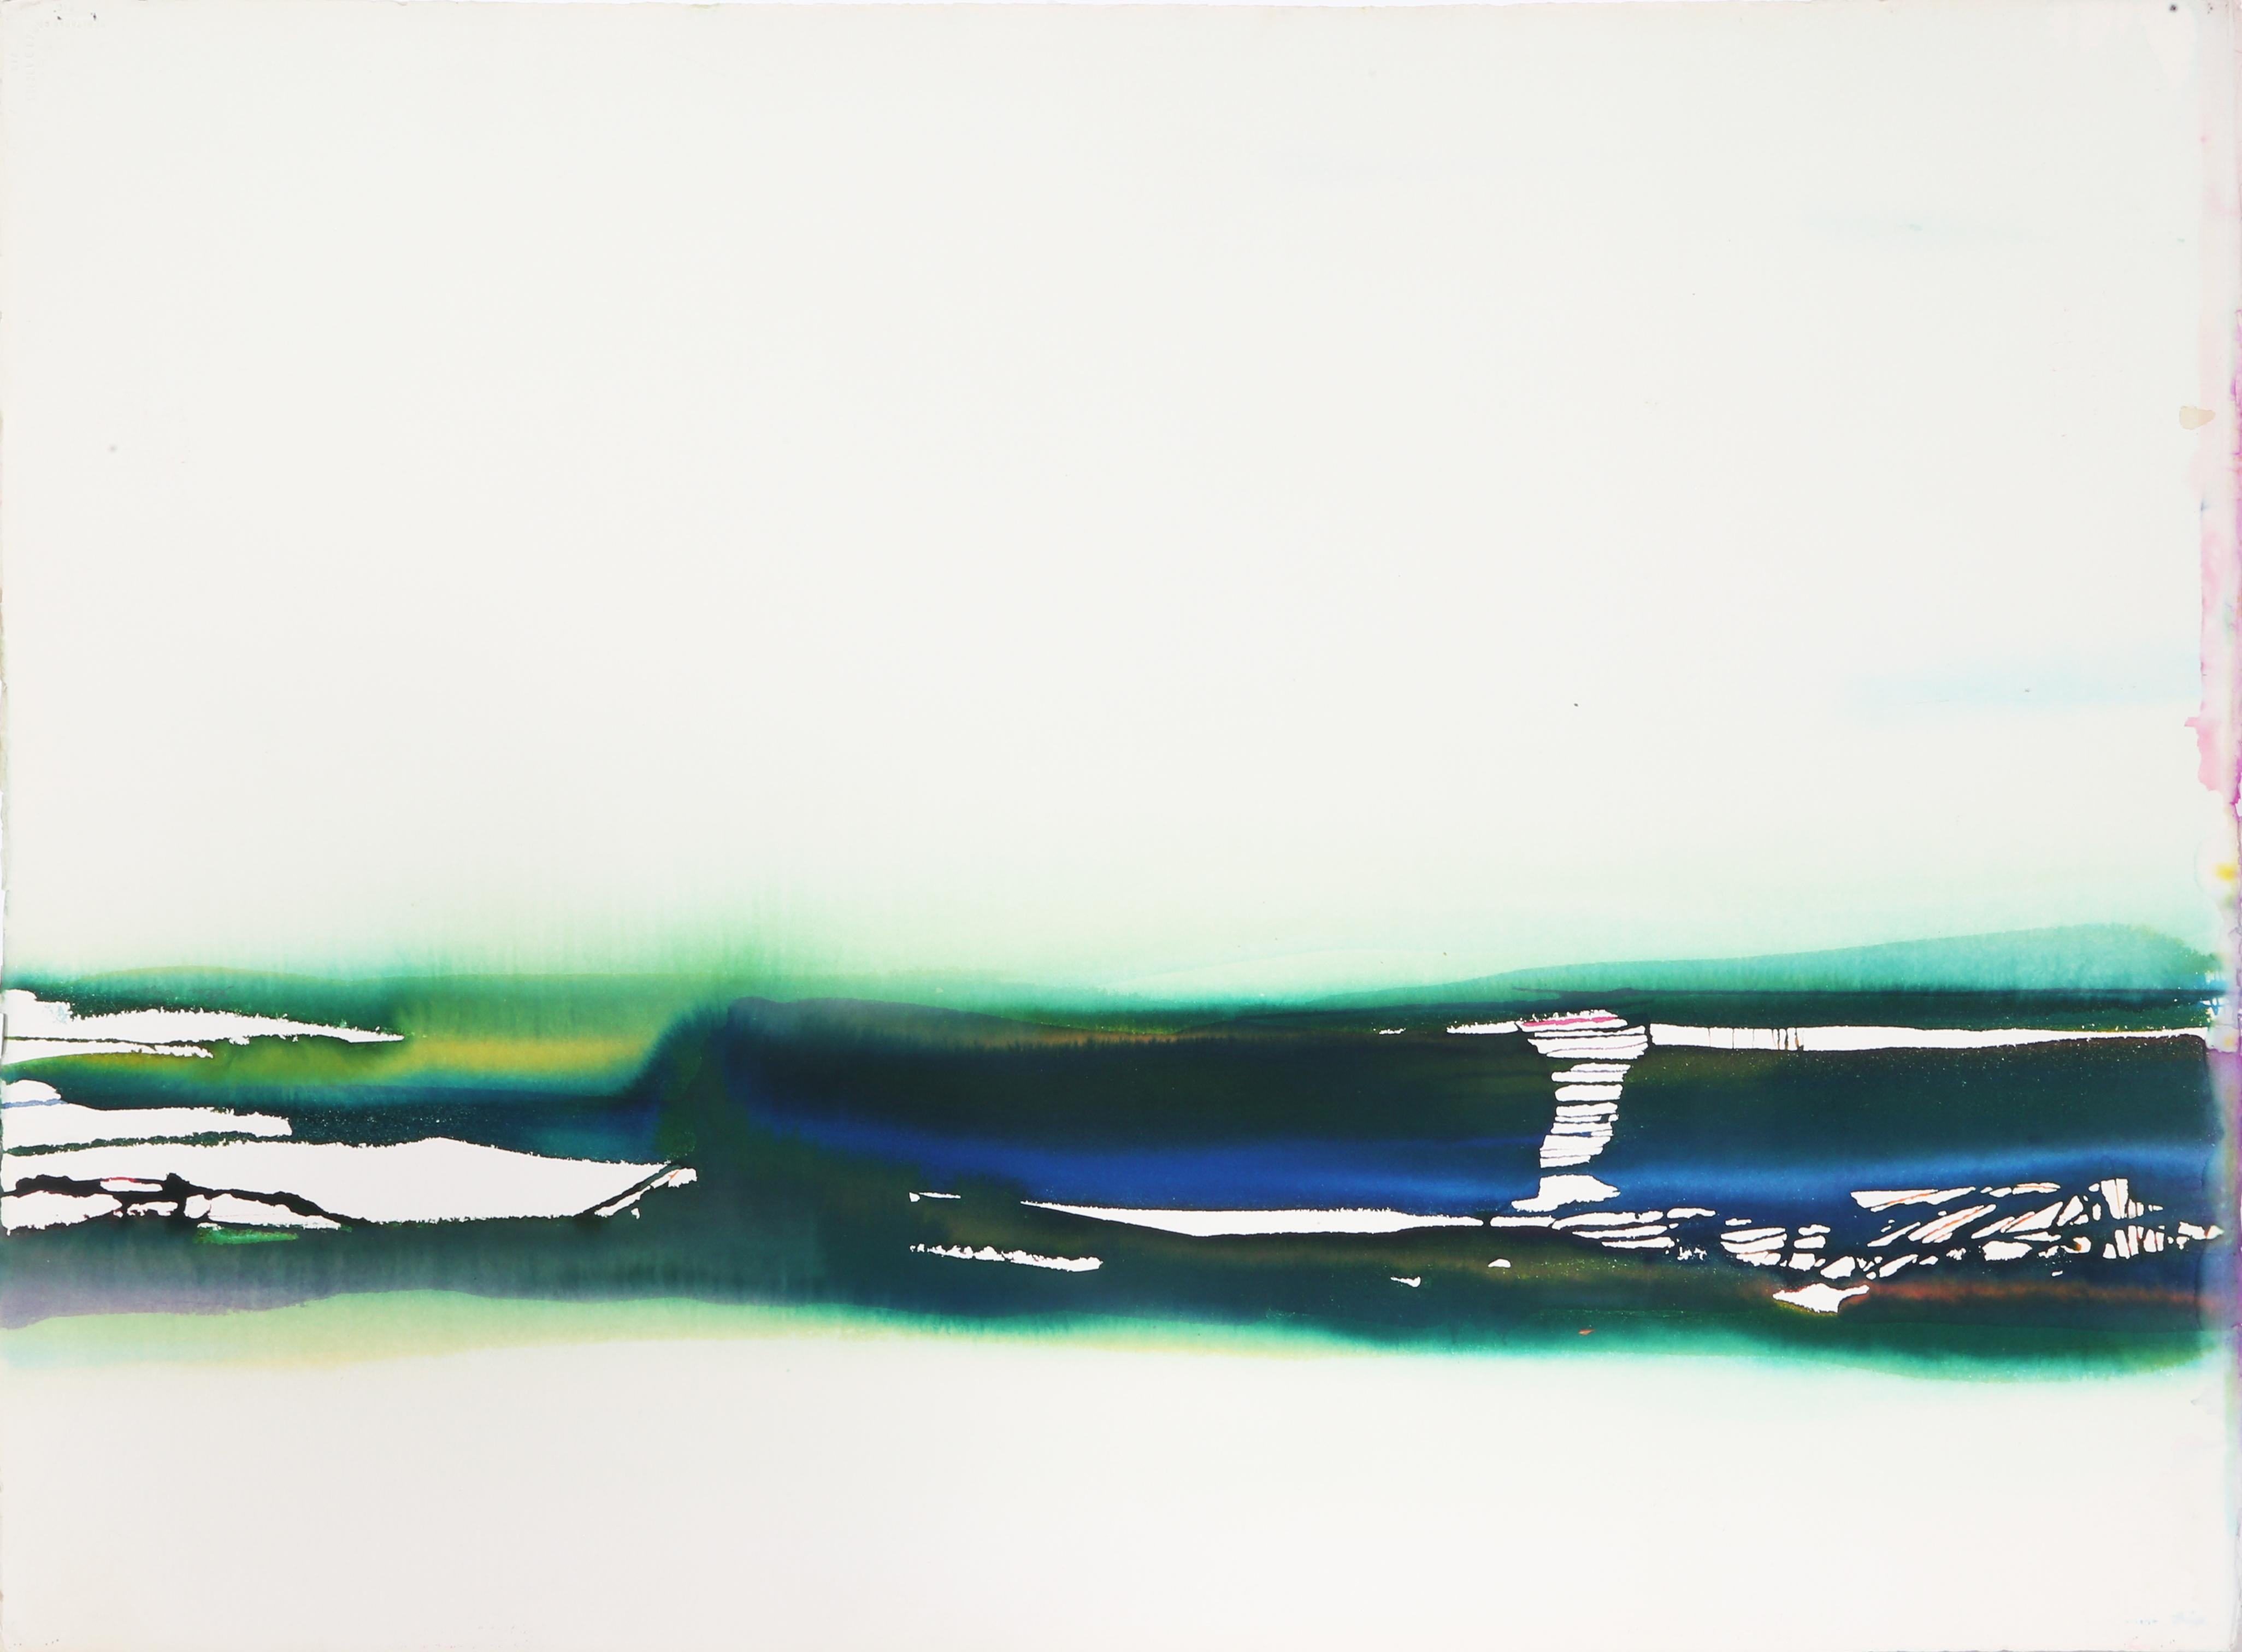 An abstract green and blue swipe of color across the horizontal axis of a page. This ink on paper piece by Geri Taper is stamped and signed on the verso.

Stream
Geri Taper, American (1929–2004)
Ink on Arches, stamped and signed on verso
Size: 22 x